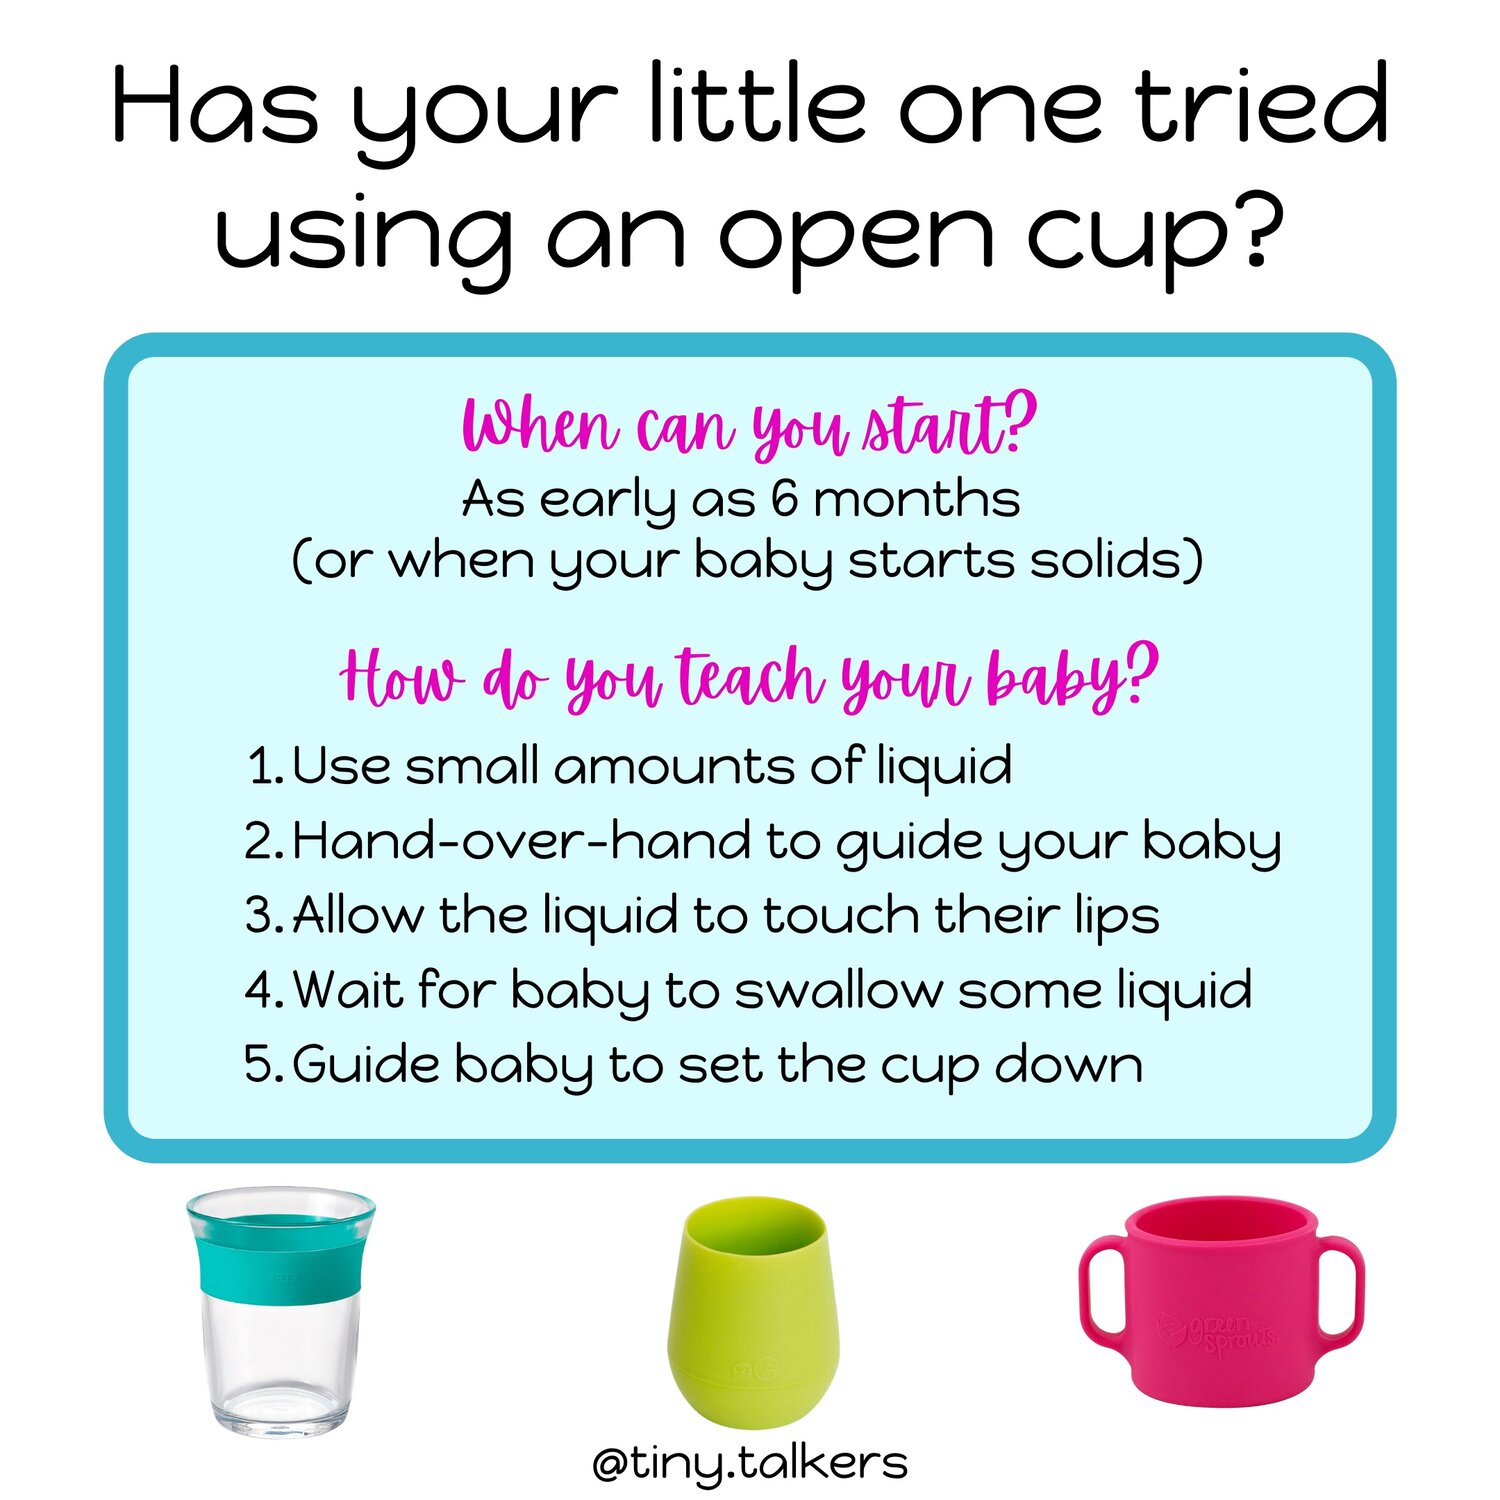 When to Introduce Straw Cups to Baby